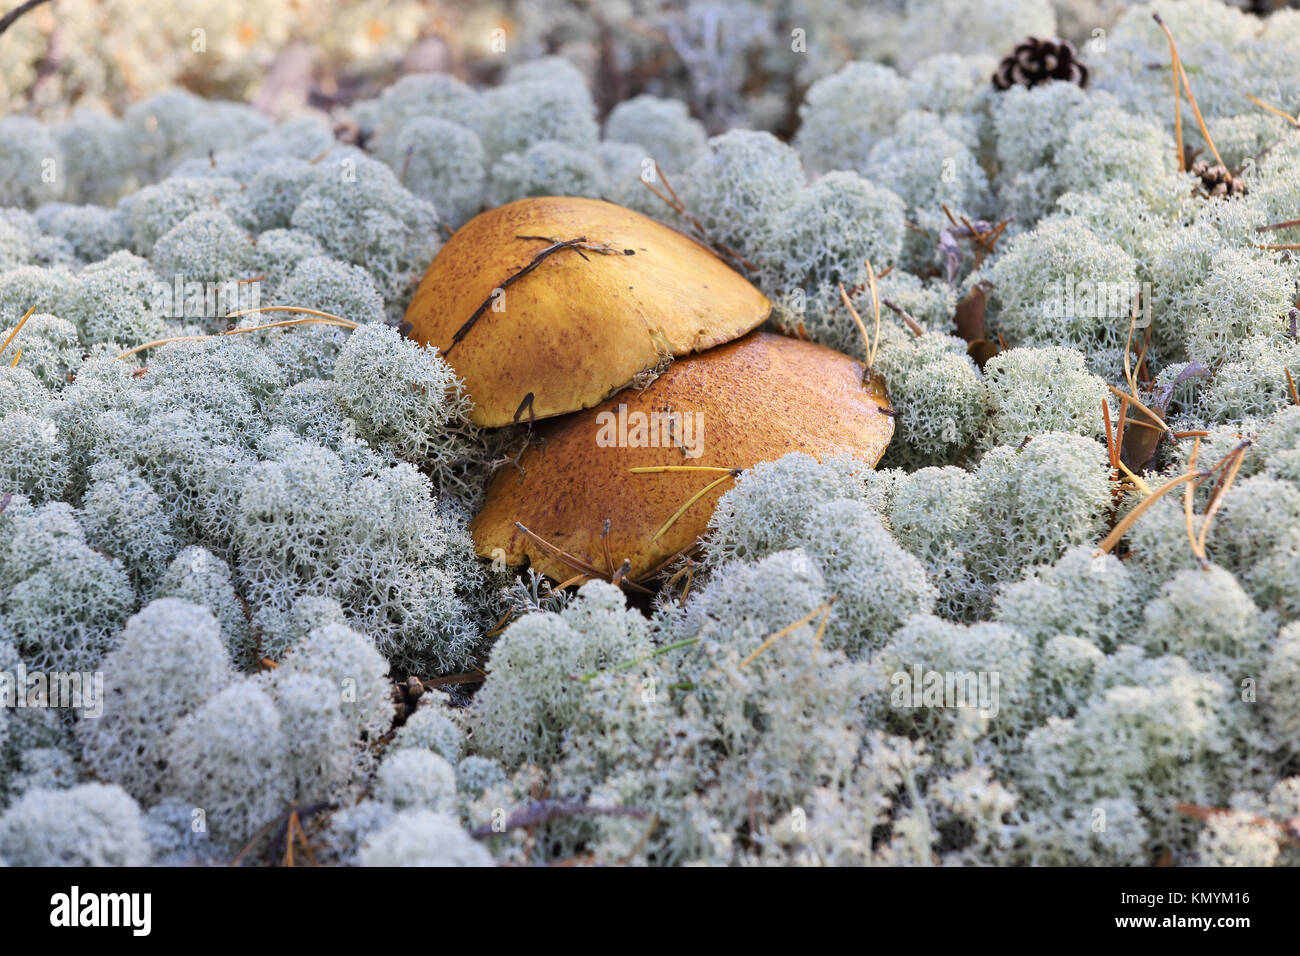 The natural landscape - wild mushrooms growing in the forest of moss Stock Photo